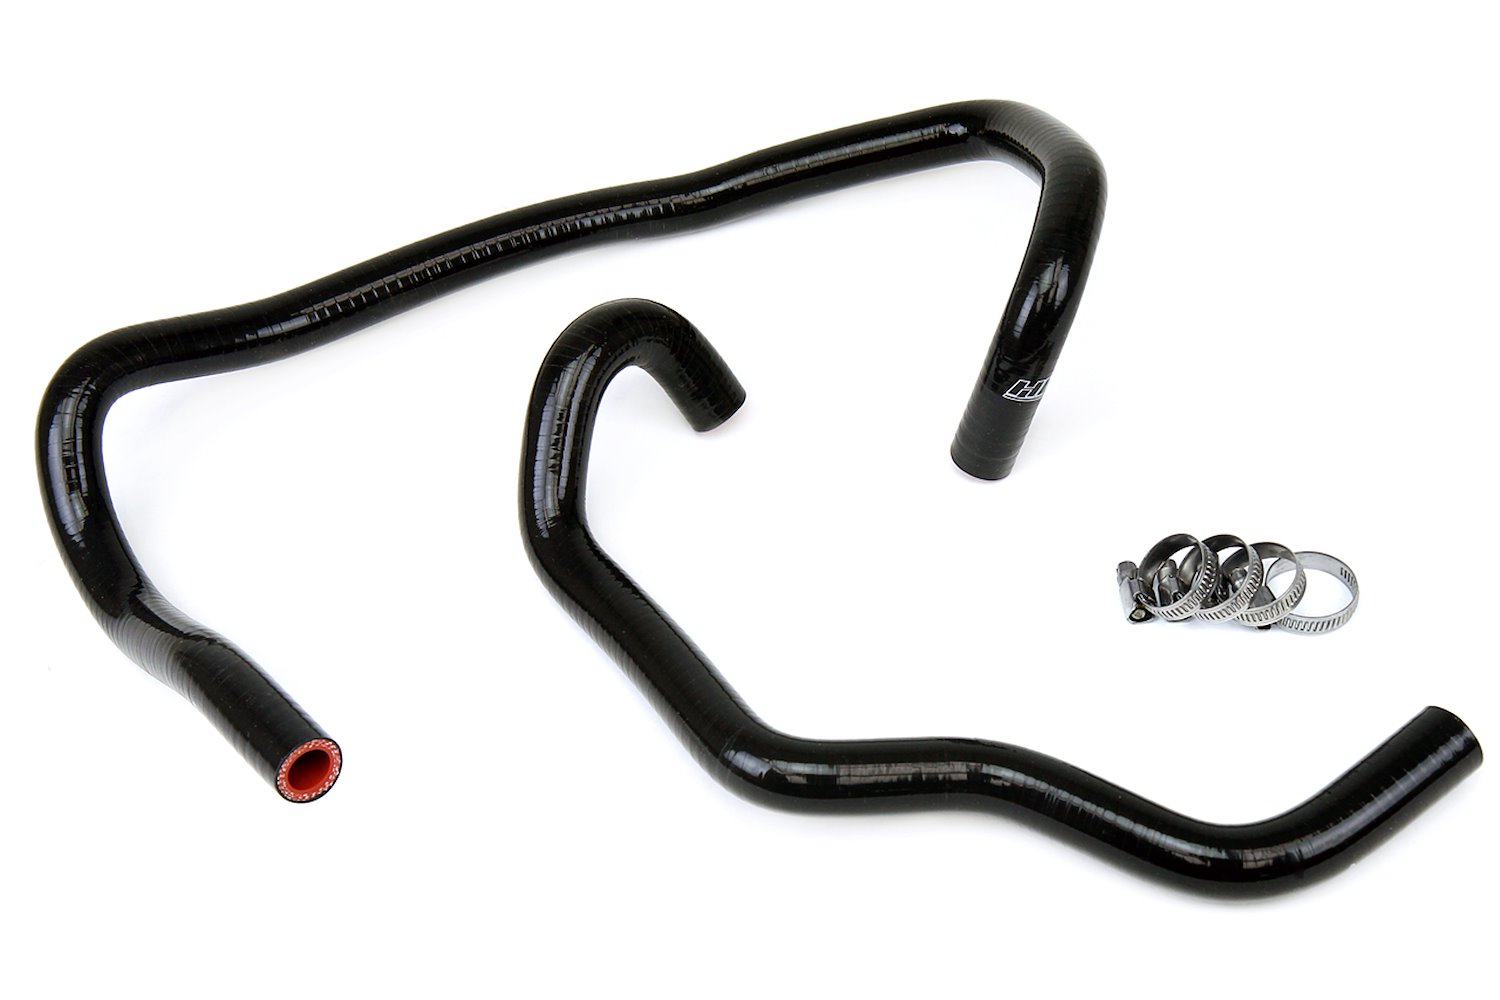 57-1469-BLK Heater Hose Kit, High-Temp 3-Ply Reinforced Silicone, Replace OEM Rubber Heater Coolant Hoses